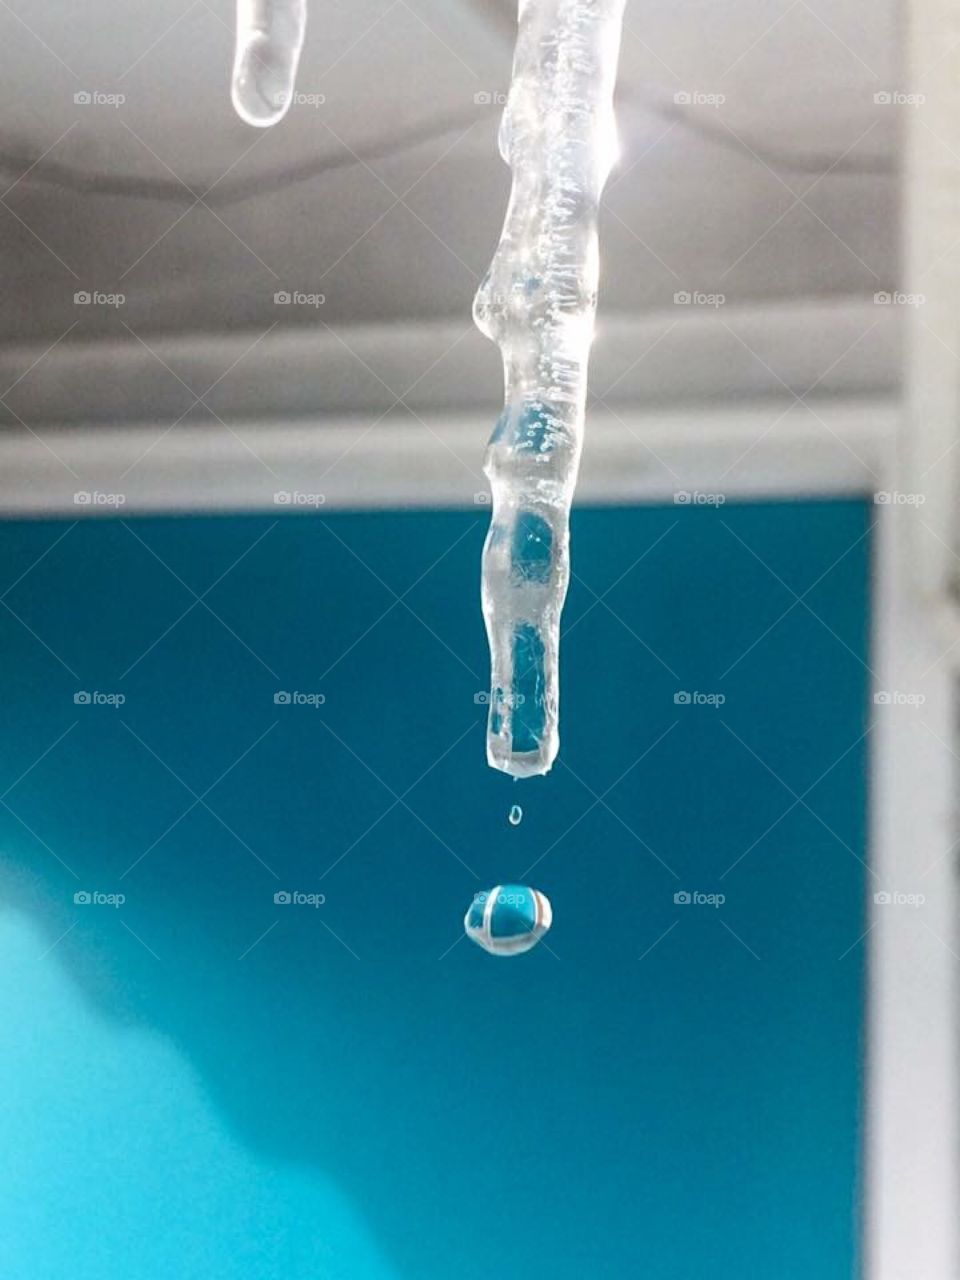 Dripping icicle